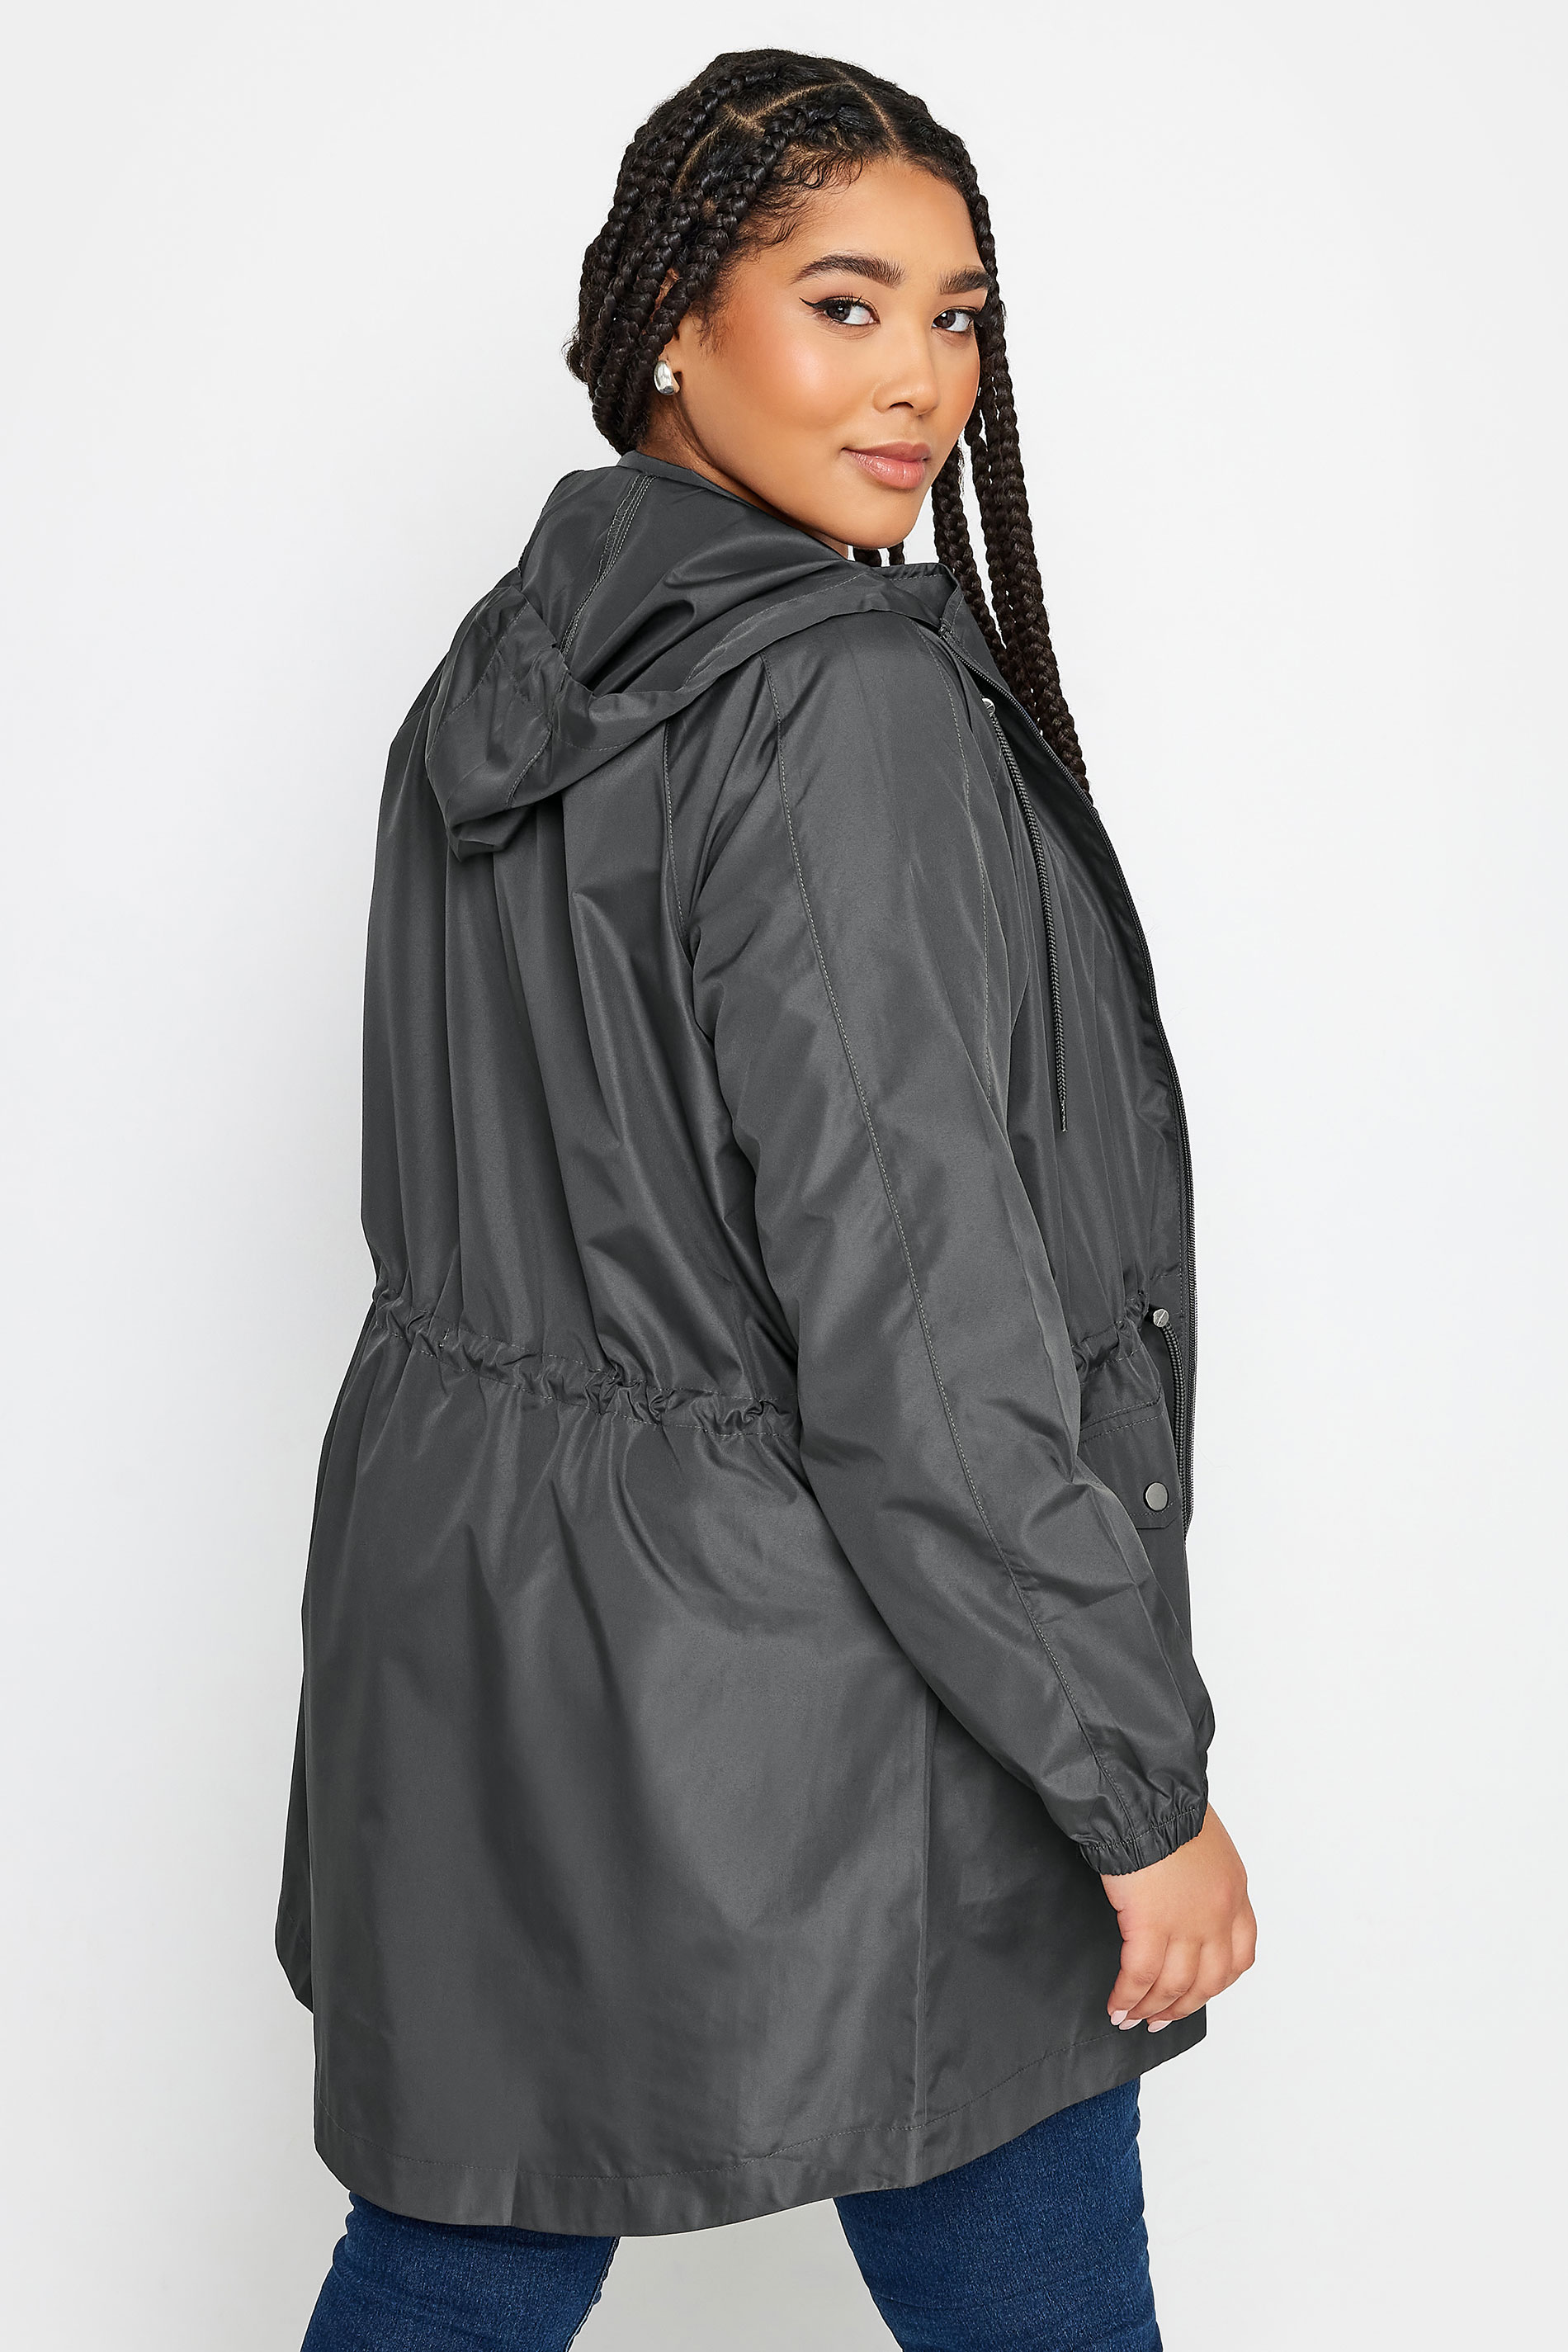 YOURS Plus Size Dark Grey Lightweight Parka Jacket | Yours Clothing 3